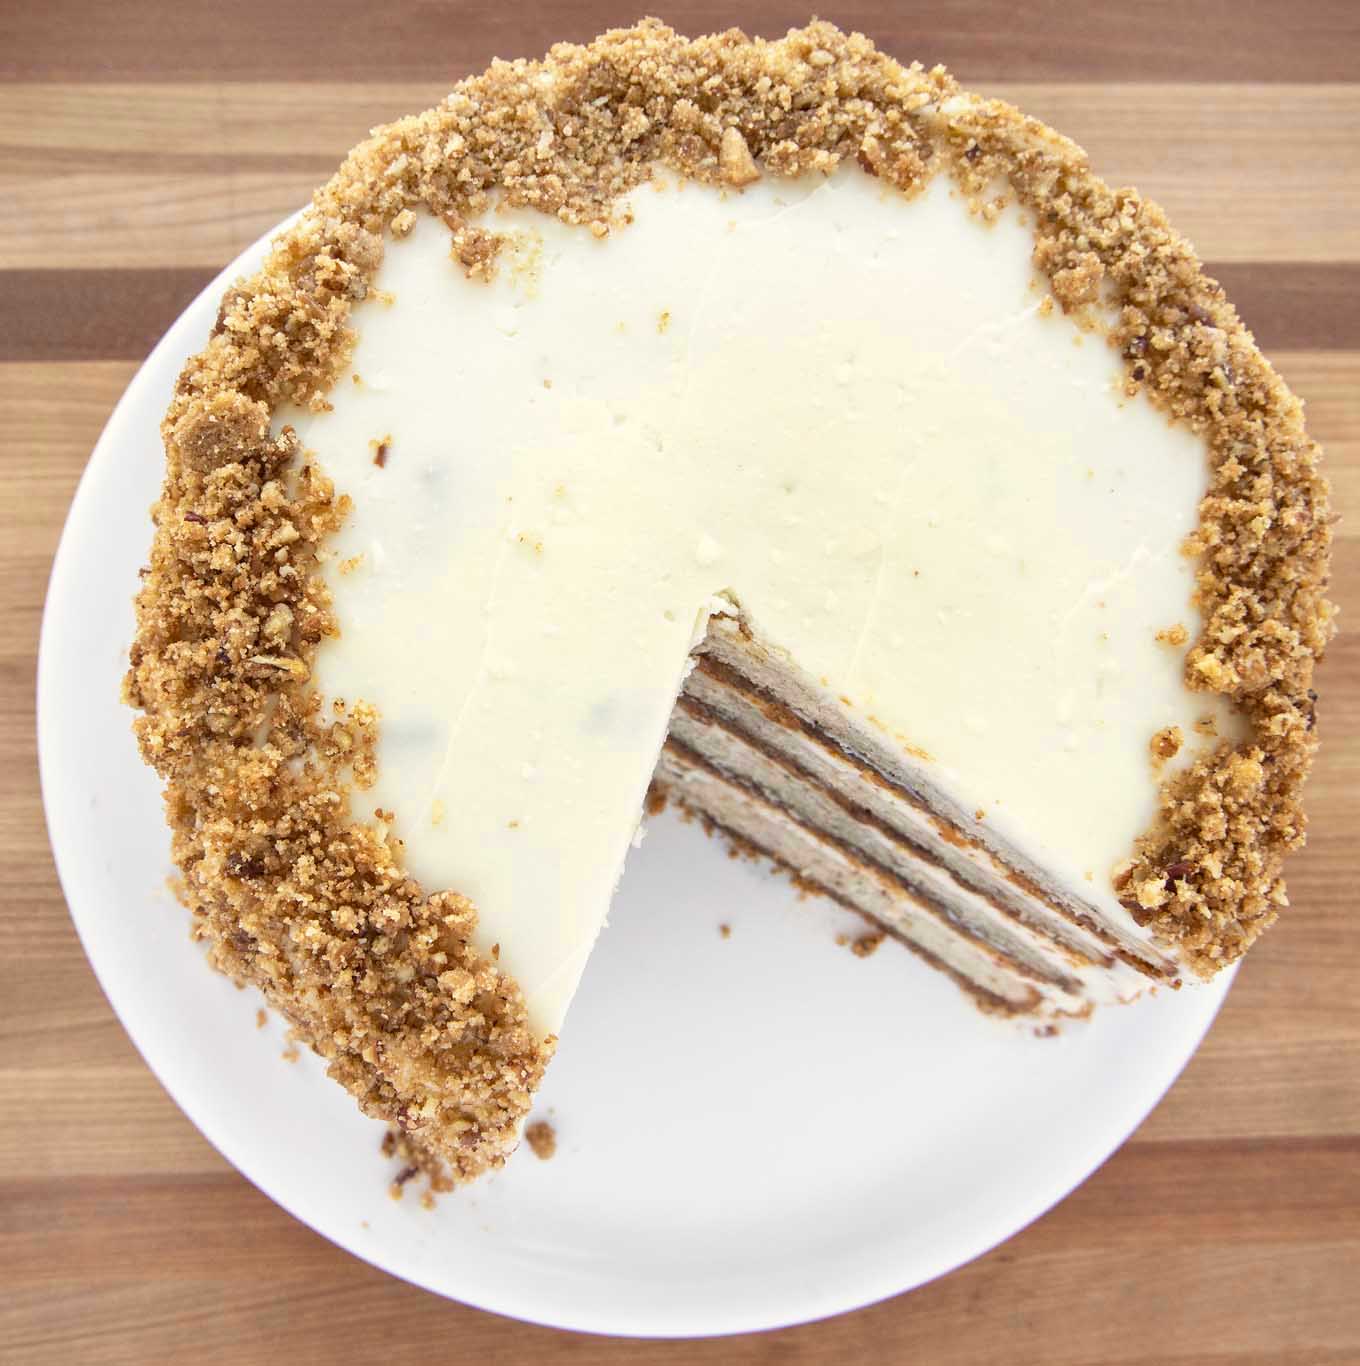 overhead view of banana crunch cake with ¼ of the cake cut out